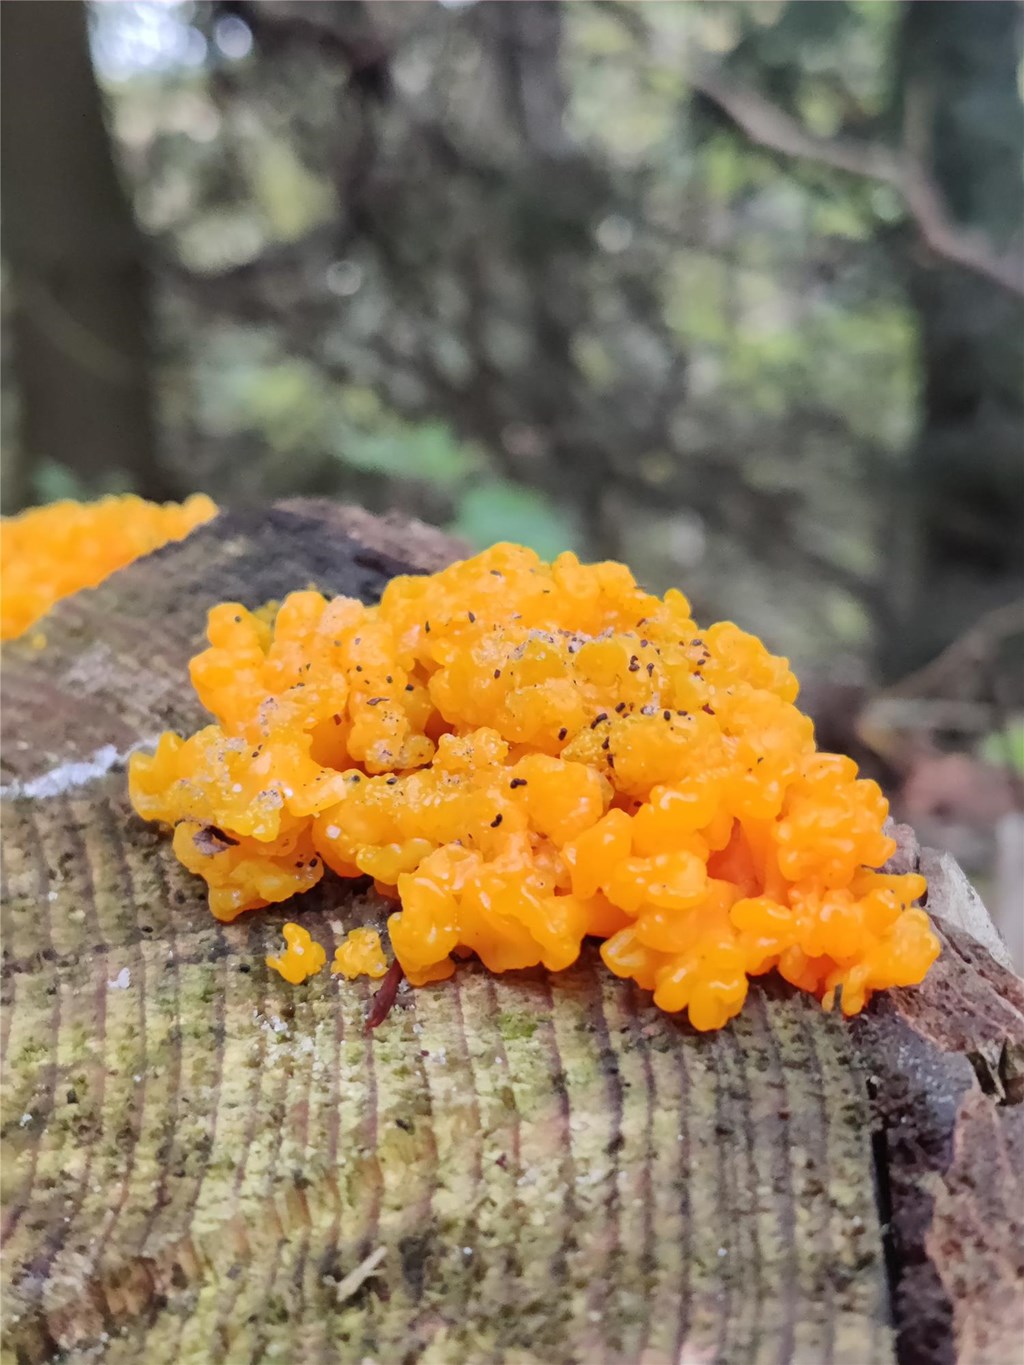 Witches’ Butter, Amy Labella